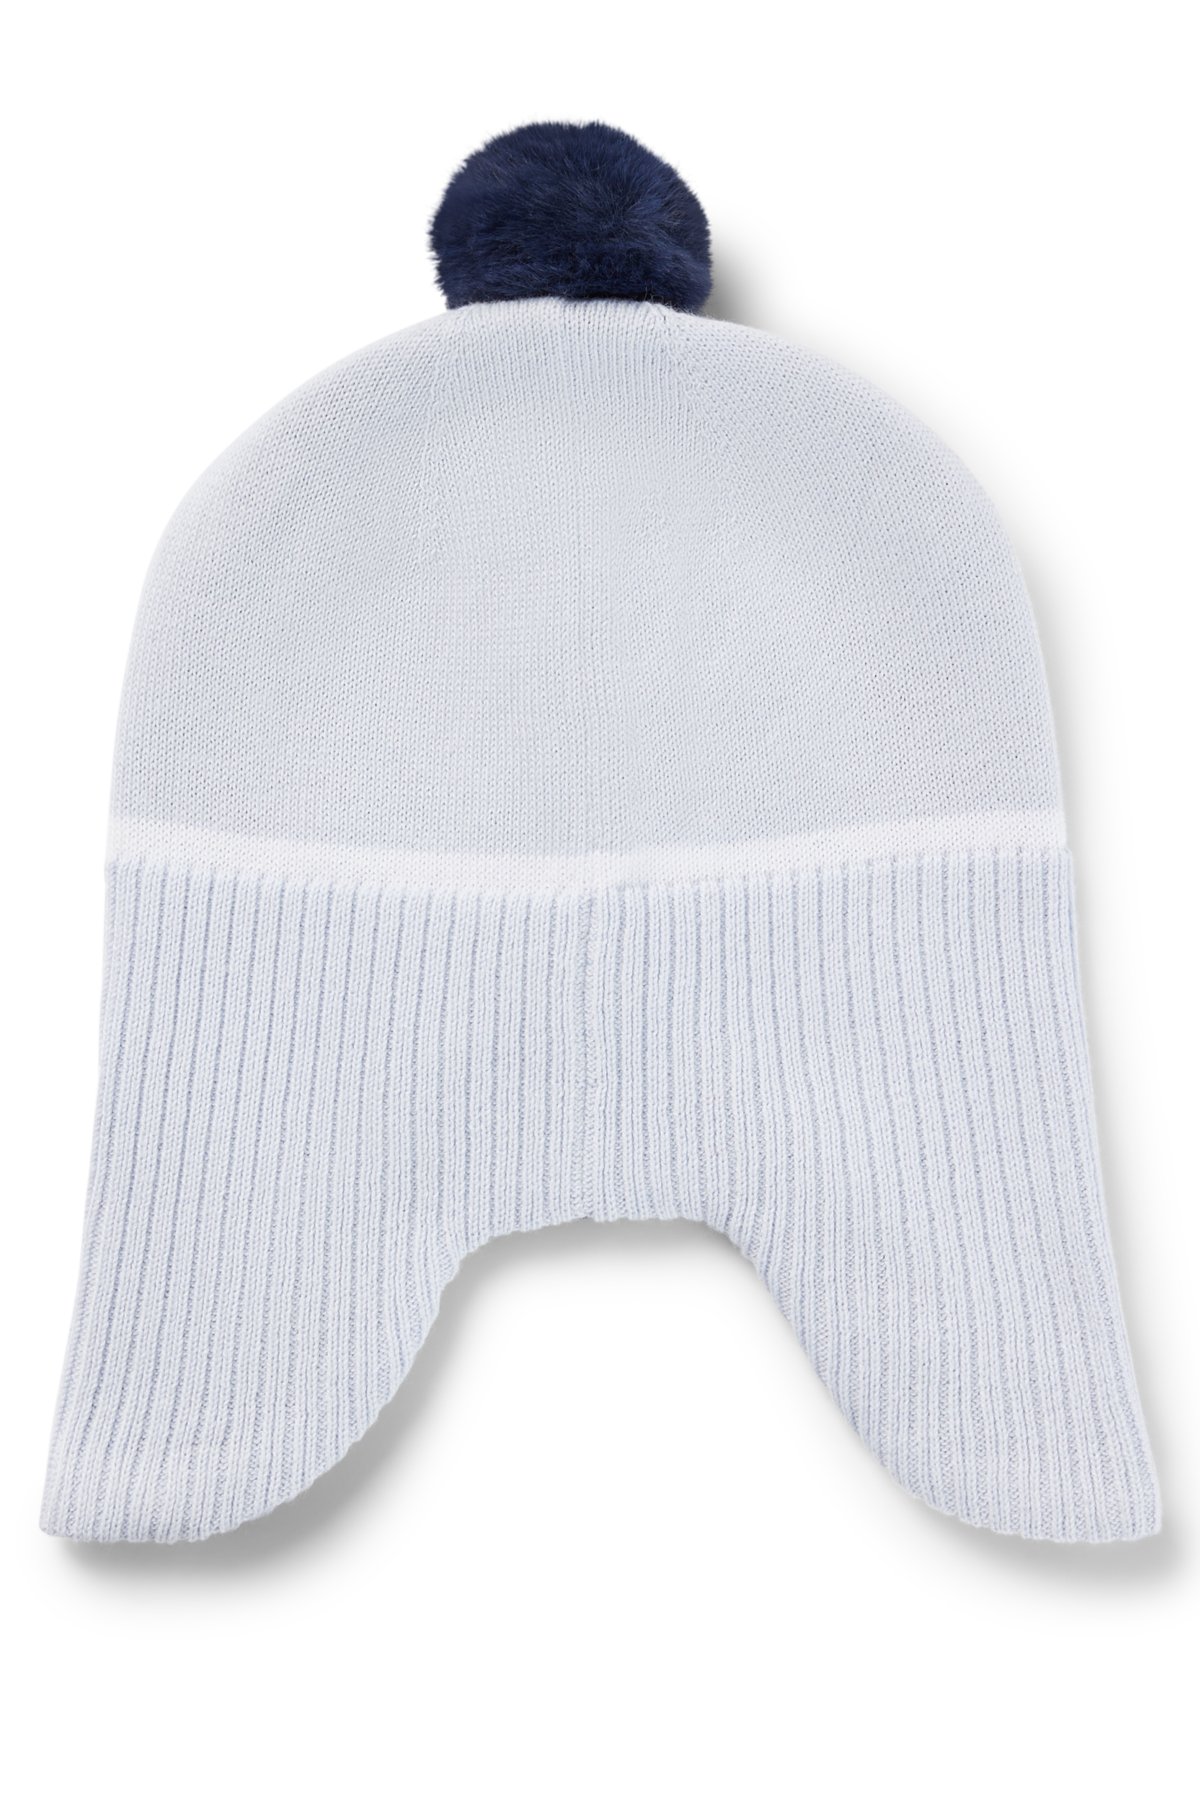 Baby beanie hat with pompom and ear covers, Light Blue